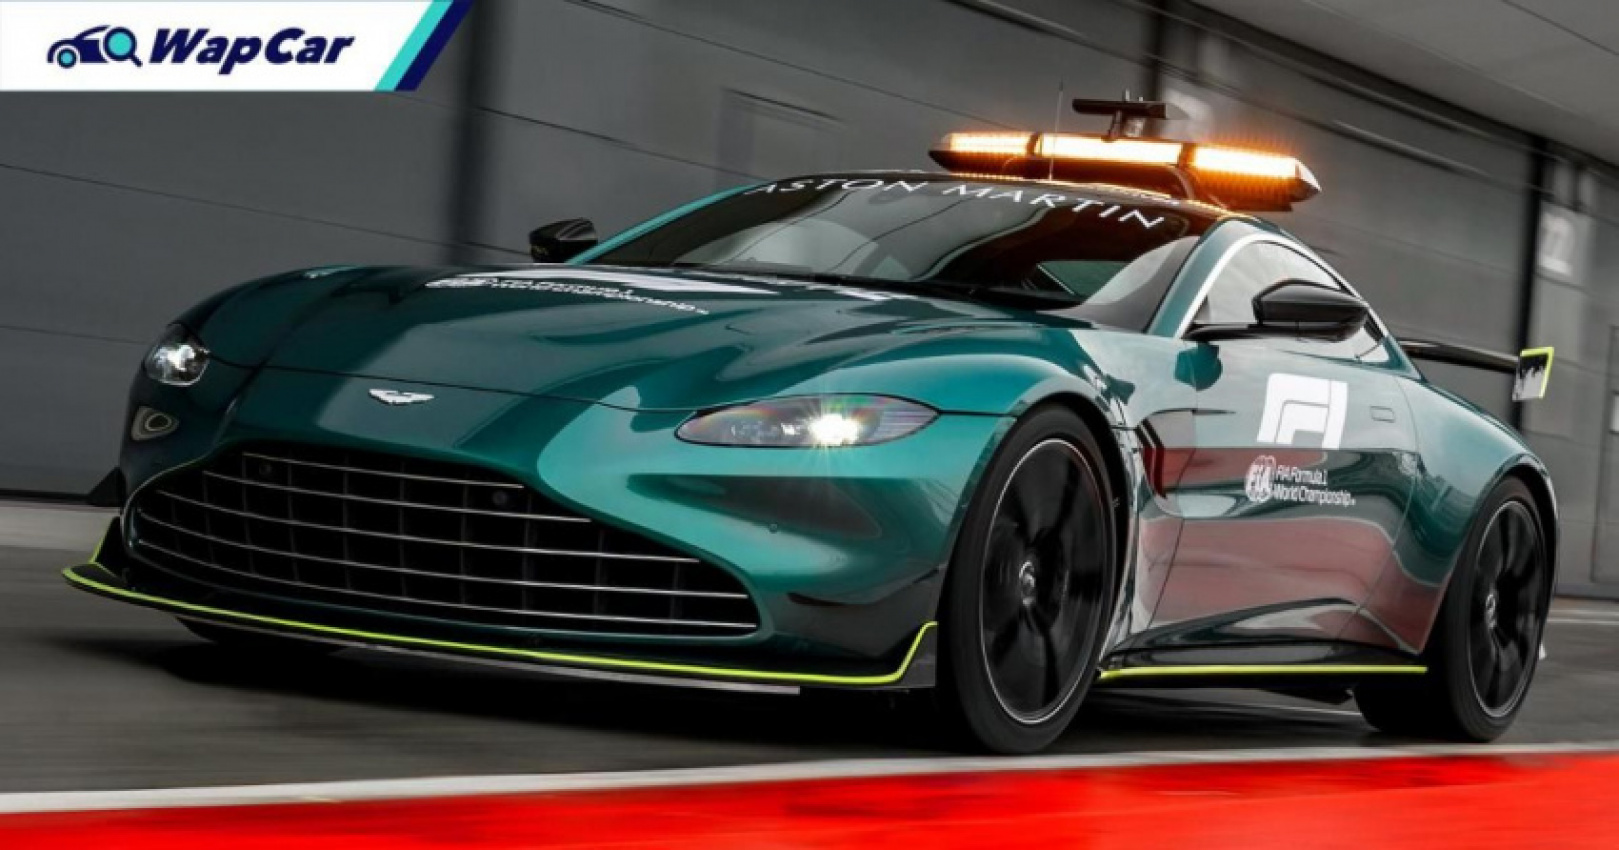 aston martin, autos, cars, honda, mercedes-benz, mg, mercedes, max verstappen calls aston martin safety car ‘a turtle’ after holding up his honda-powered red bull. prefers the mercedes-amg gt